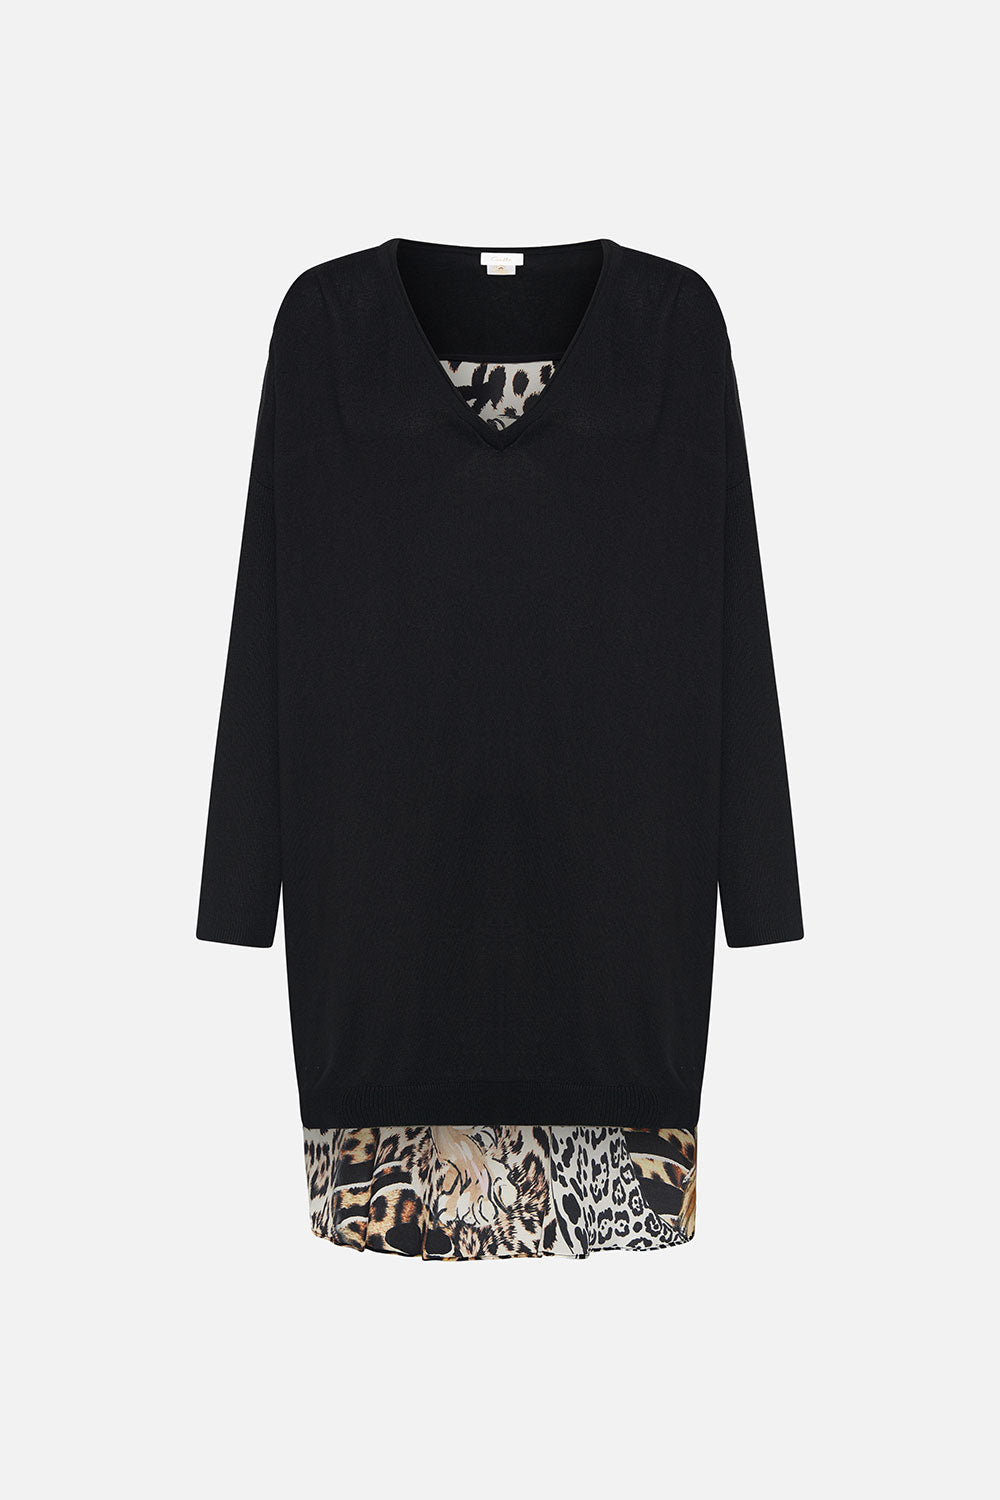 V NECK JUMPER WITH PRINT BACK WHATS NEW PUSSYCAT